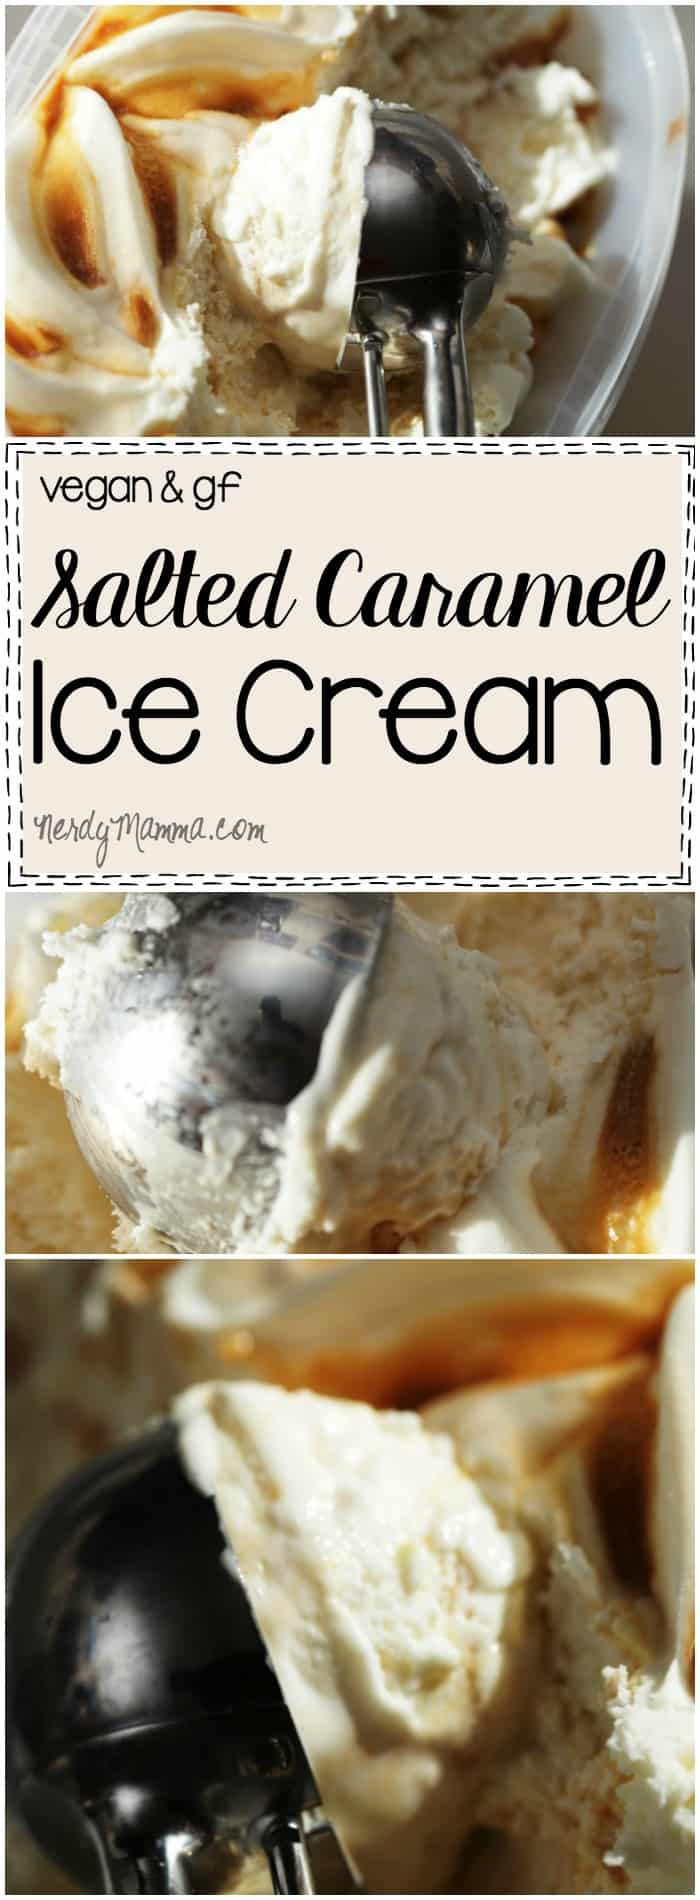 This recipe for vegan and gluten-free salted caramel ice cream is so EASY! I love it!